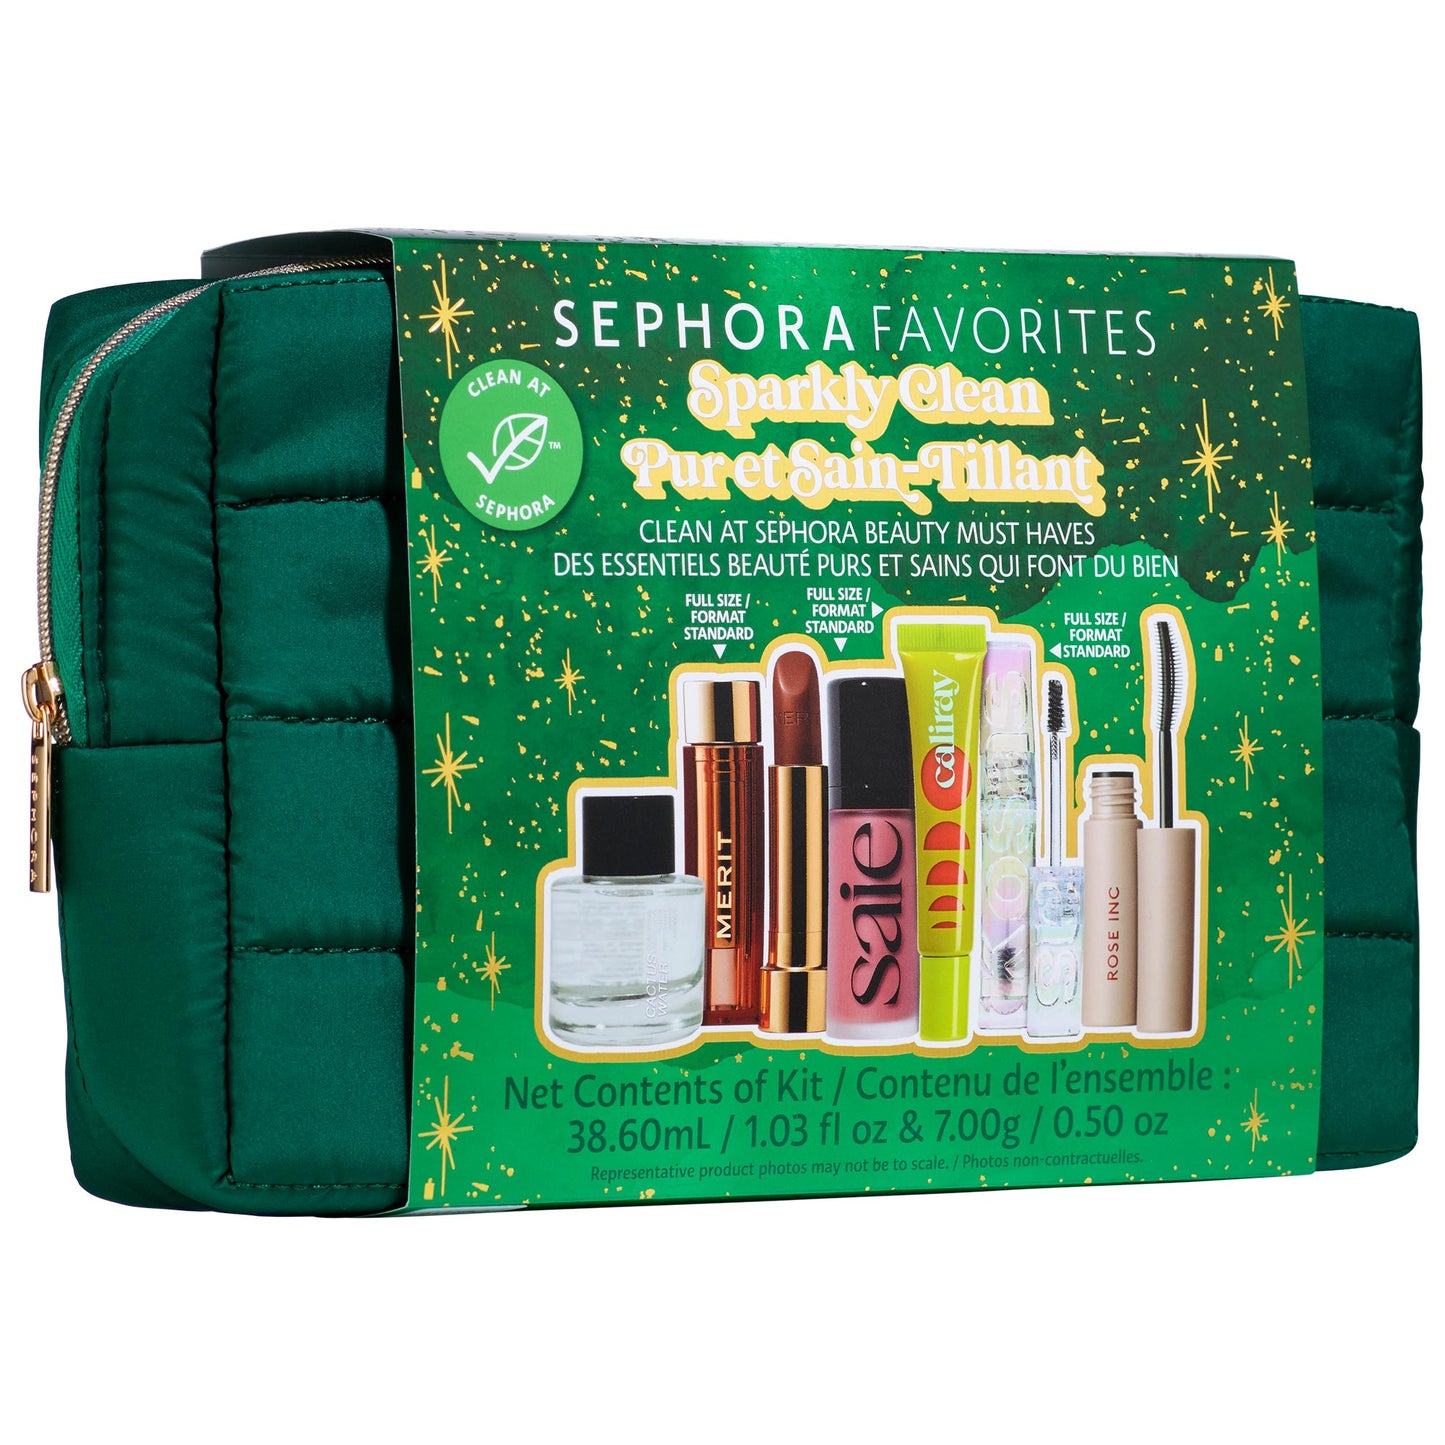 Sephora Favorites | Holiday Sparkly Clean Beauty Kit